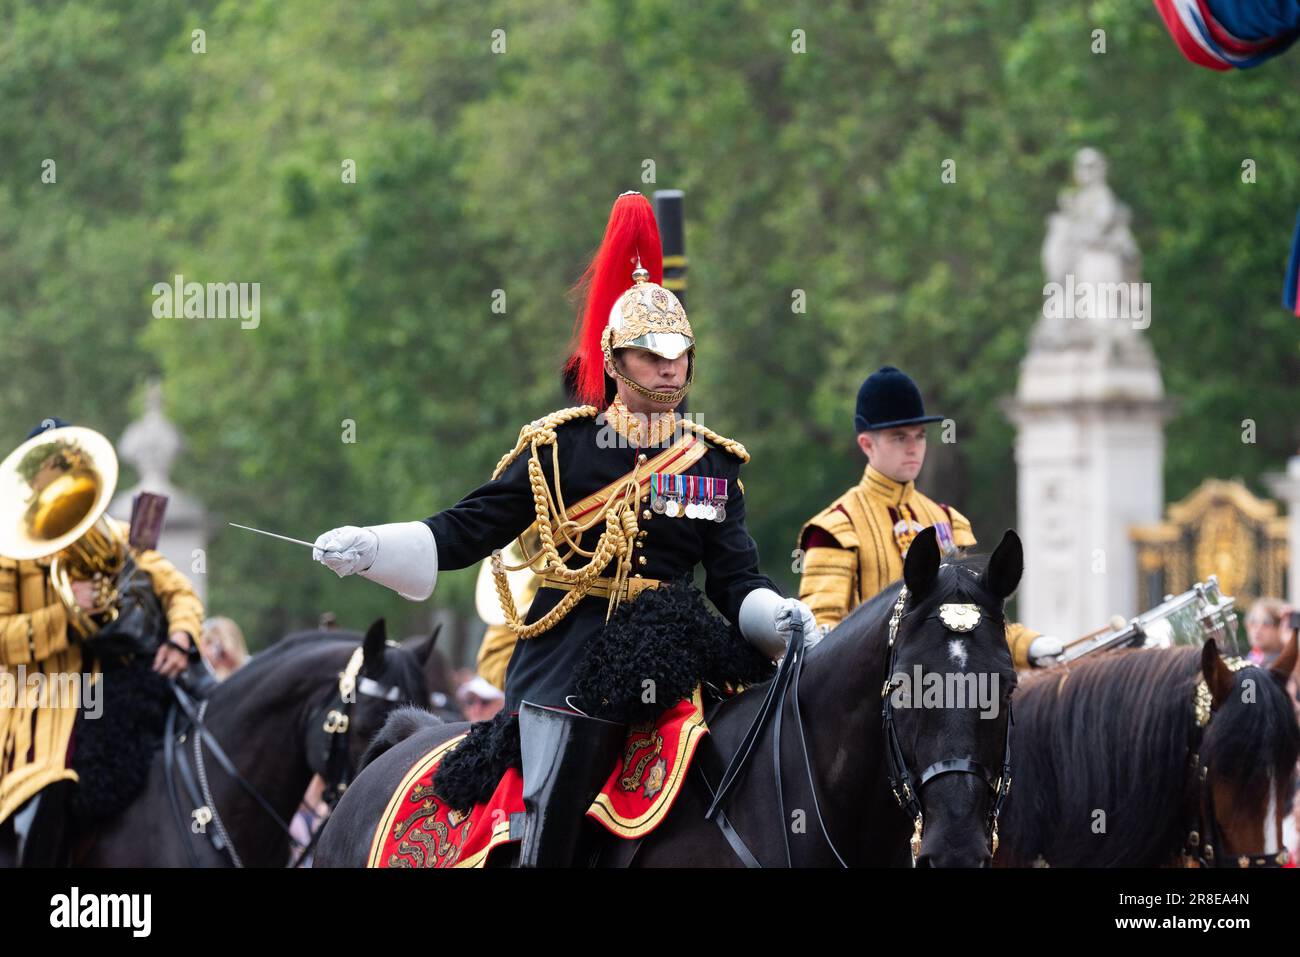 Major Paul Collis - Smith, Musical Director of the Household Cavalry Band, conducting the band during Trooping the Colour in The Mall, London, UK Stock Photo